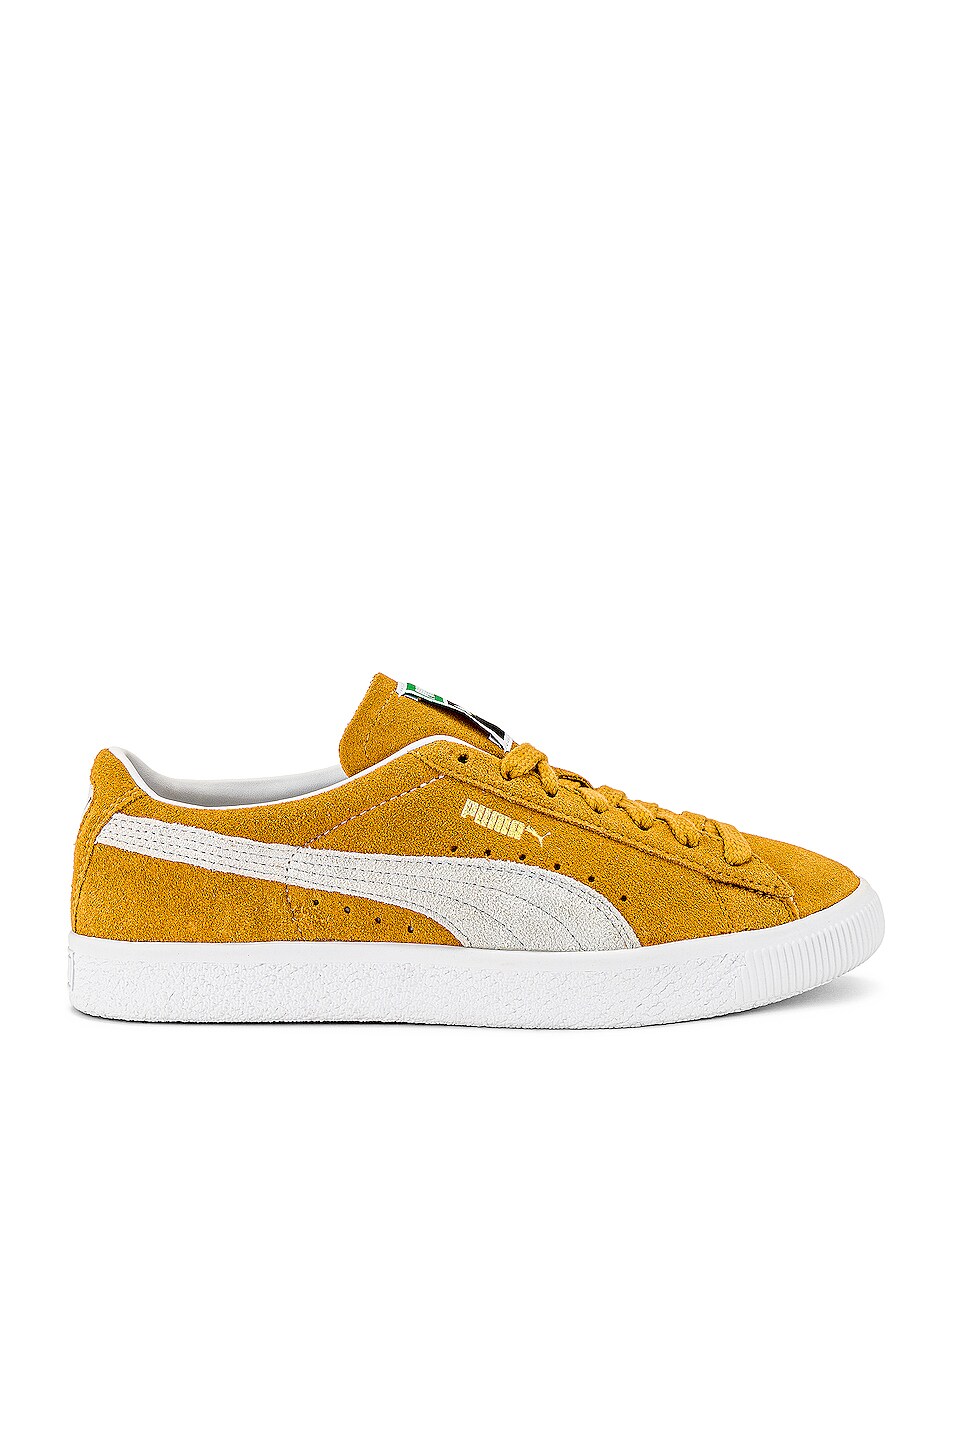 Image 1 of Puma Select Suede VTG in Honey Mustard